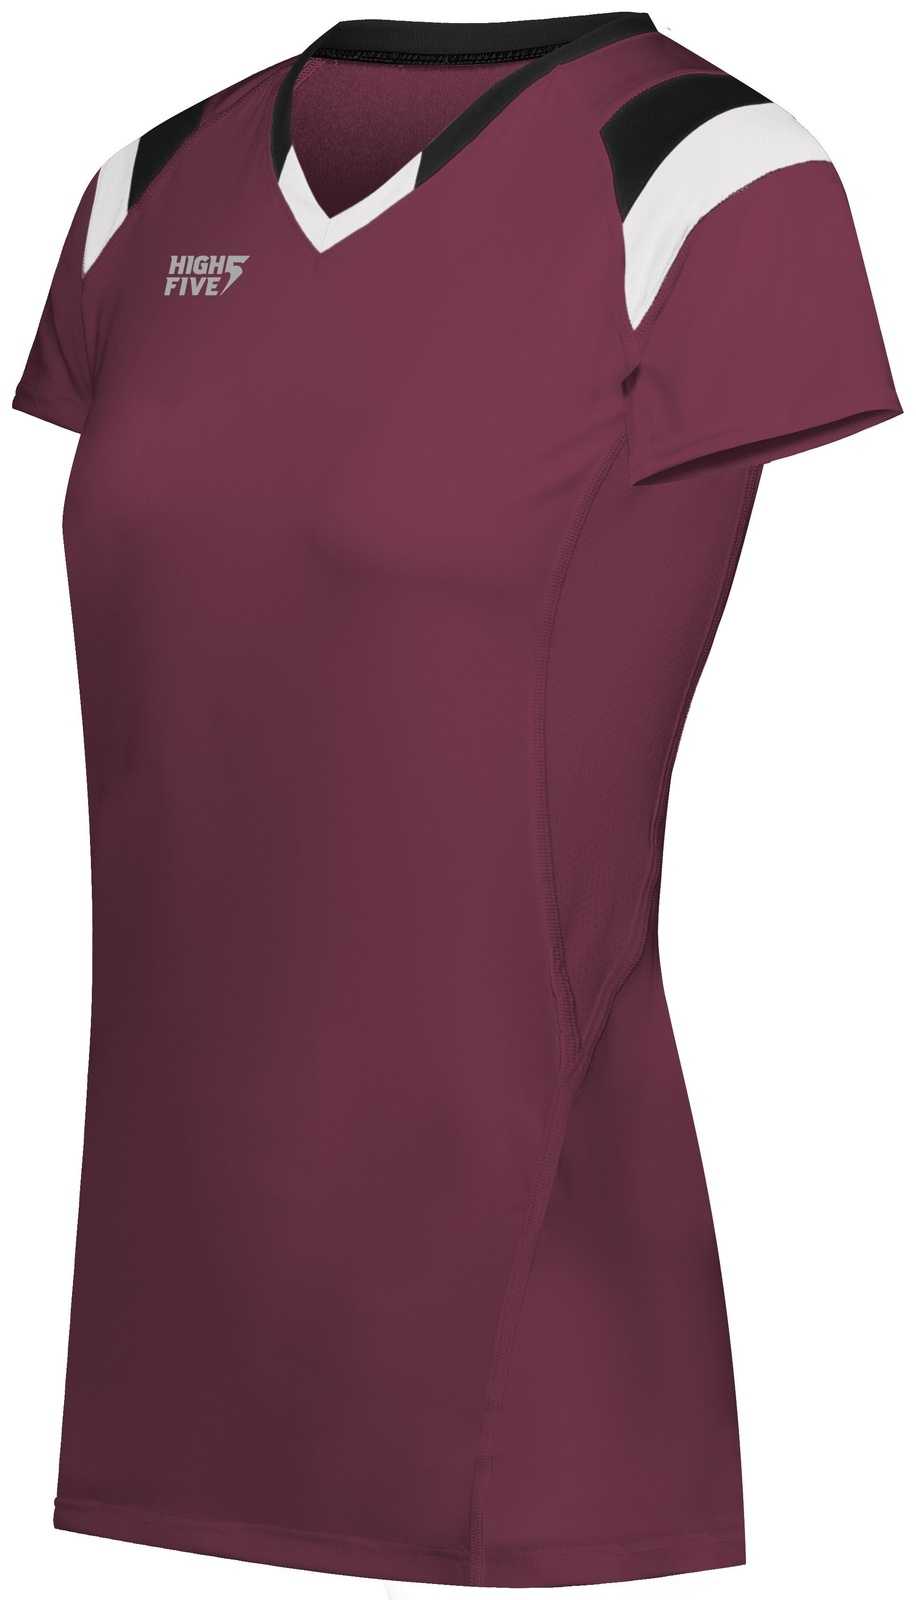 High Five 342252 Ladies TruHit Tri Short Sleeve Jersey - Maroon Black White - HIT a Double